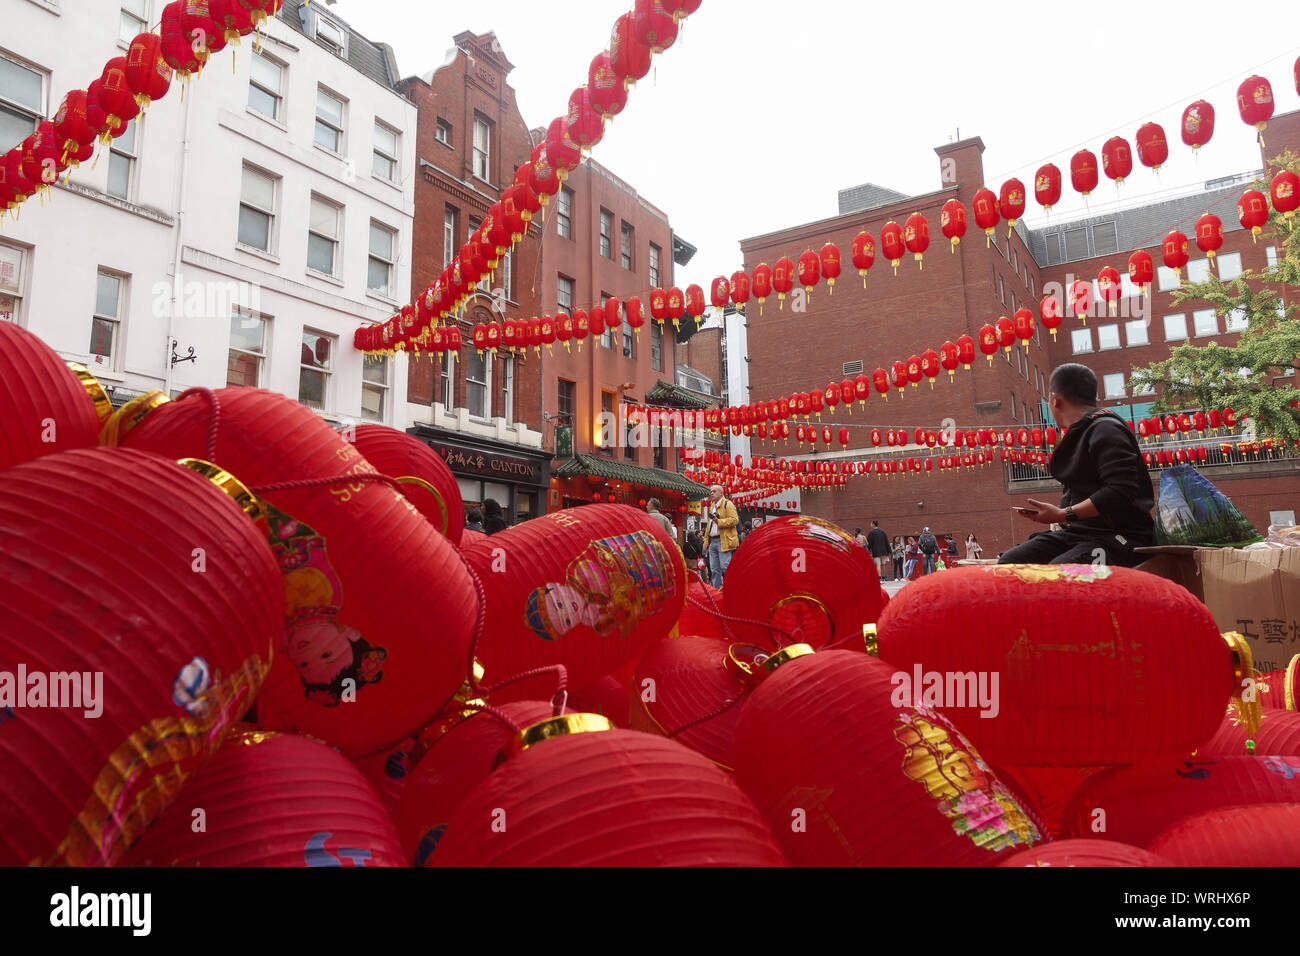 London, UK. 10th Sep, 2019. 10 September 2019. London, UK.Chinatown in Soho prepares for Chinese traditional mid-autumn festival with strings of decorated red lanterns strung above the street. Credit Peter Hogan/Alamy Credit: Peter Hogan/Alamy Live News Stock Photo